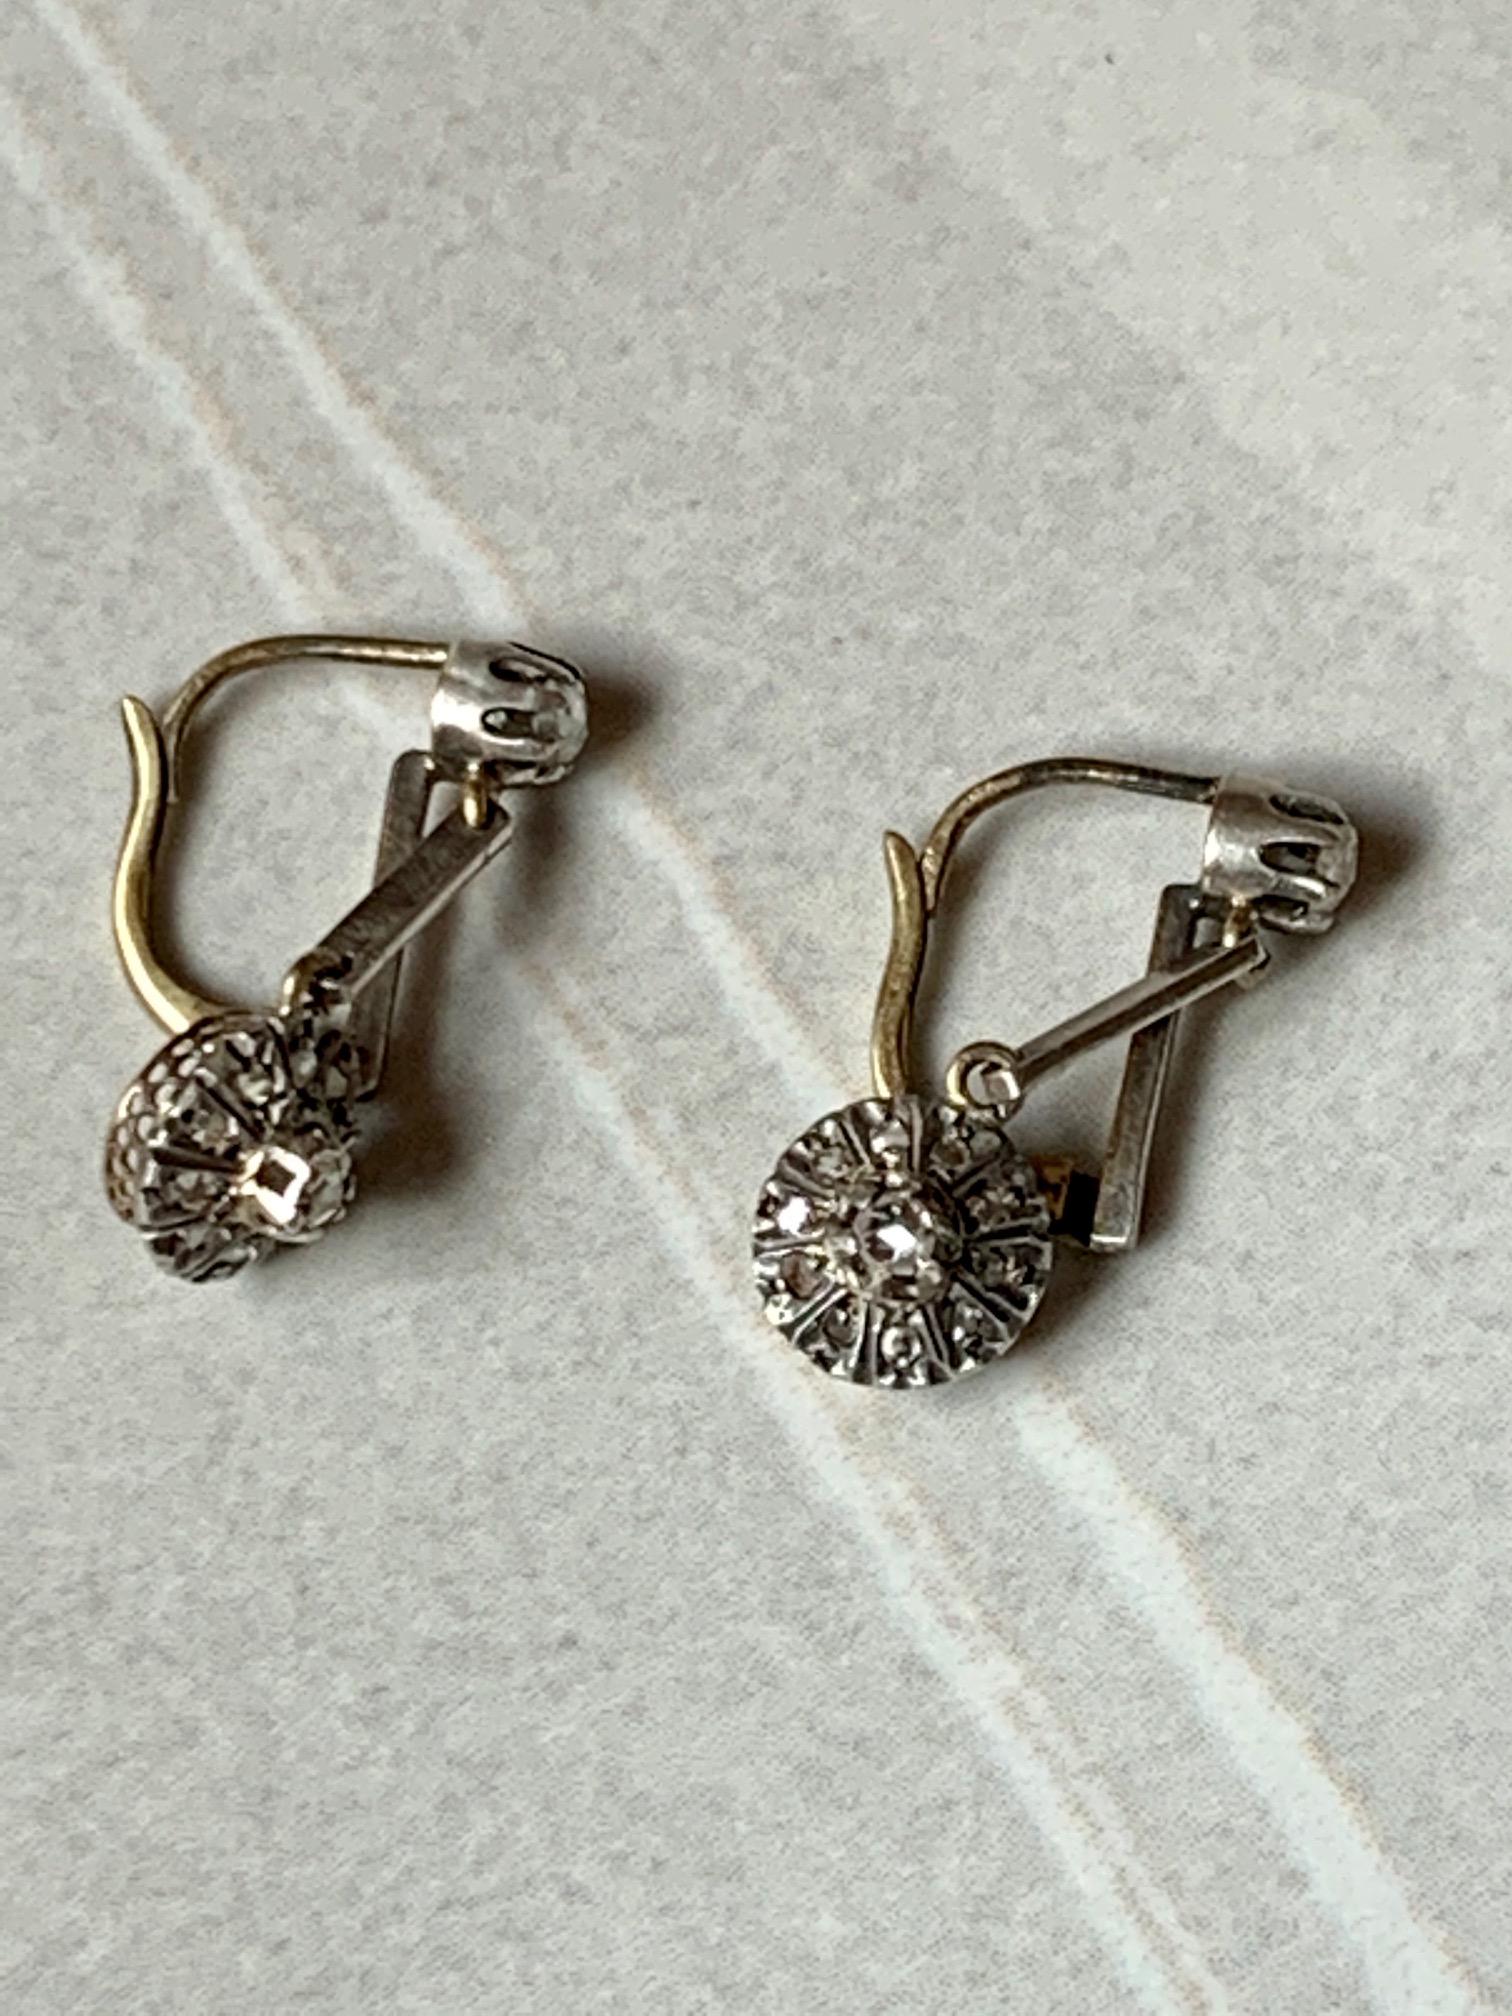 These 14k yellow Gold drop earrings feature rose cut Diamonds clustered together in a Sterling setting.  The closure is a lever back providing added security for these earrings.

Weight:  2.5 grams
